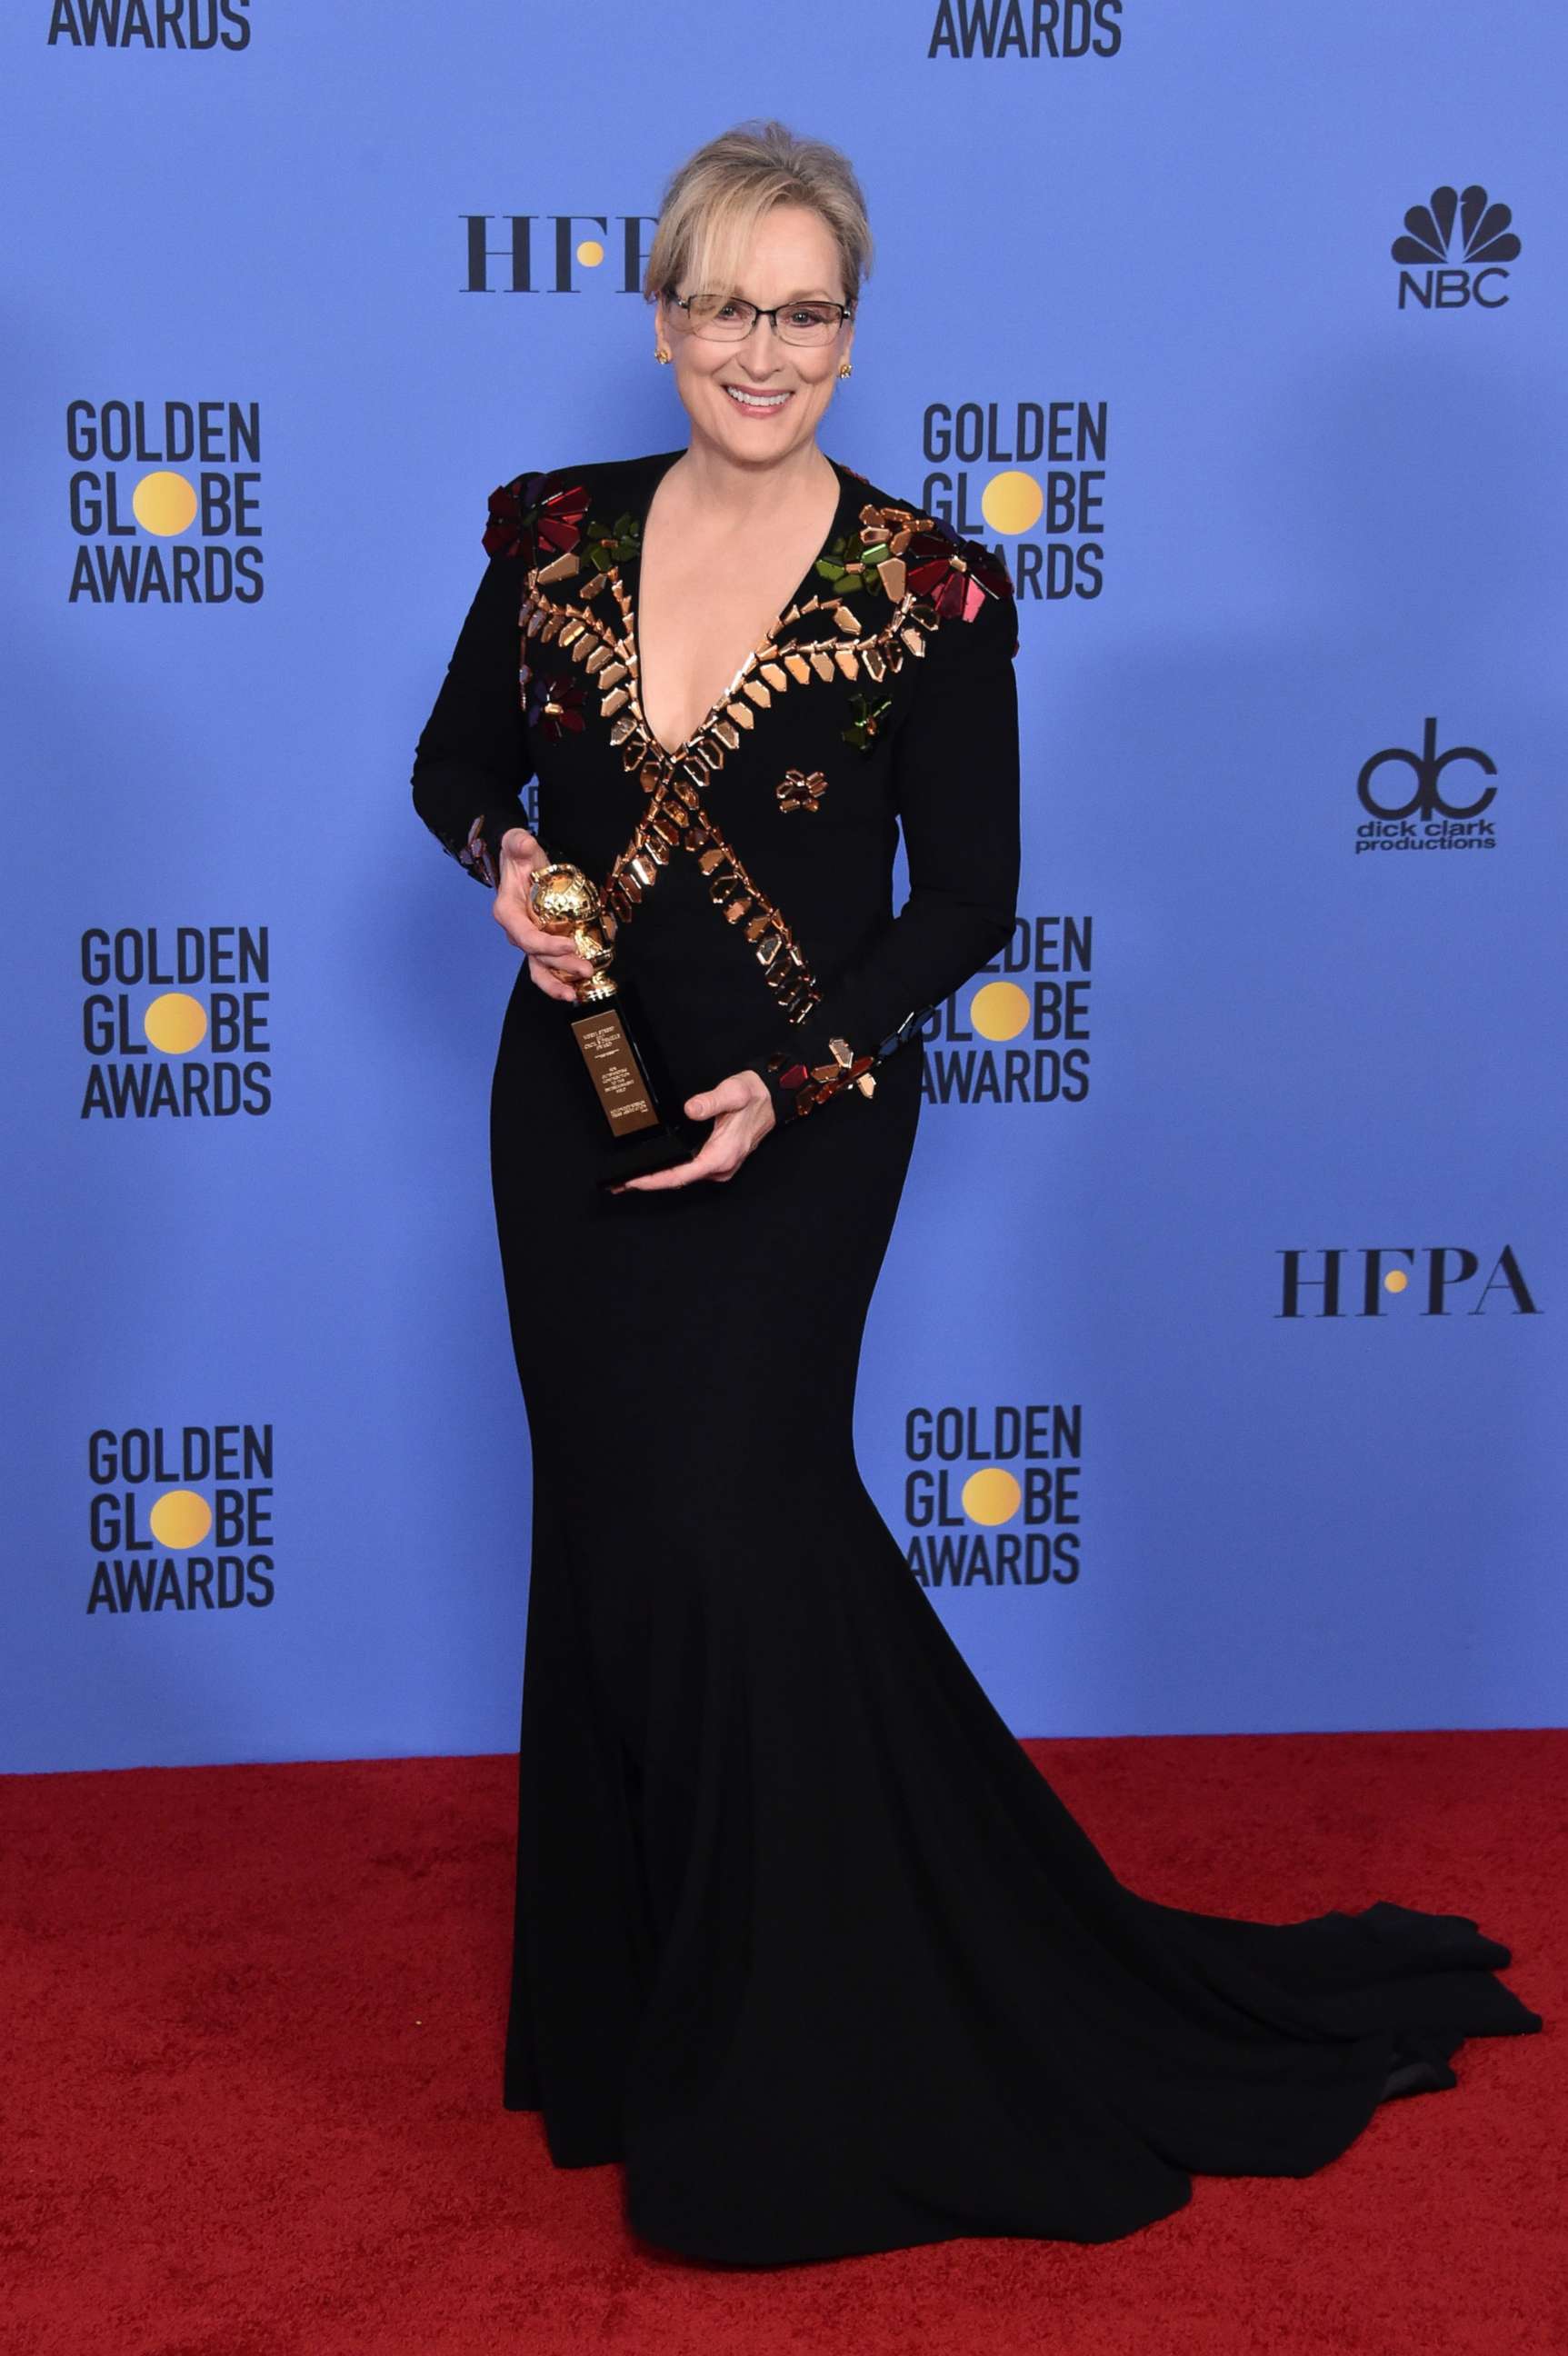 PHOTO: Meryl Streep poses in the press room during the 74th Annual Golden Globe Awards at The Beverly Hilton Hotel, Jan. 8, 2017 in Beverly Hills, Calif.  